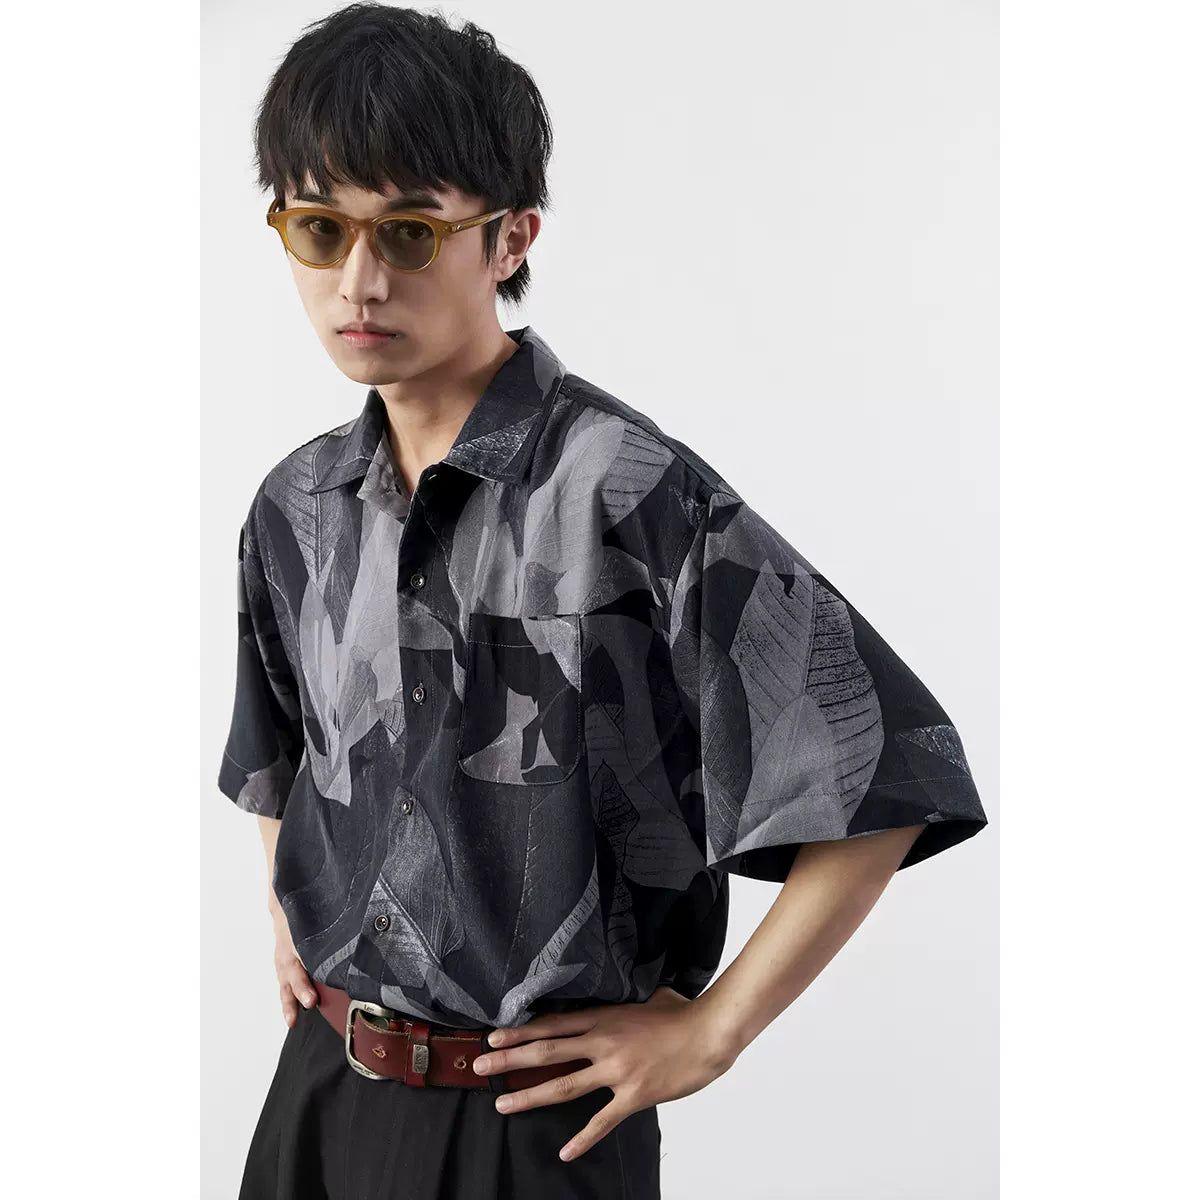 Abstract Leaves Detail Shirt Korean Street Fashion Shirt By Mentmate Shop Online at OH Vault